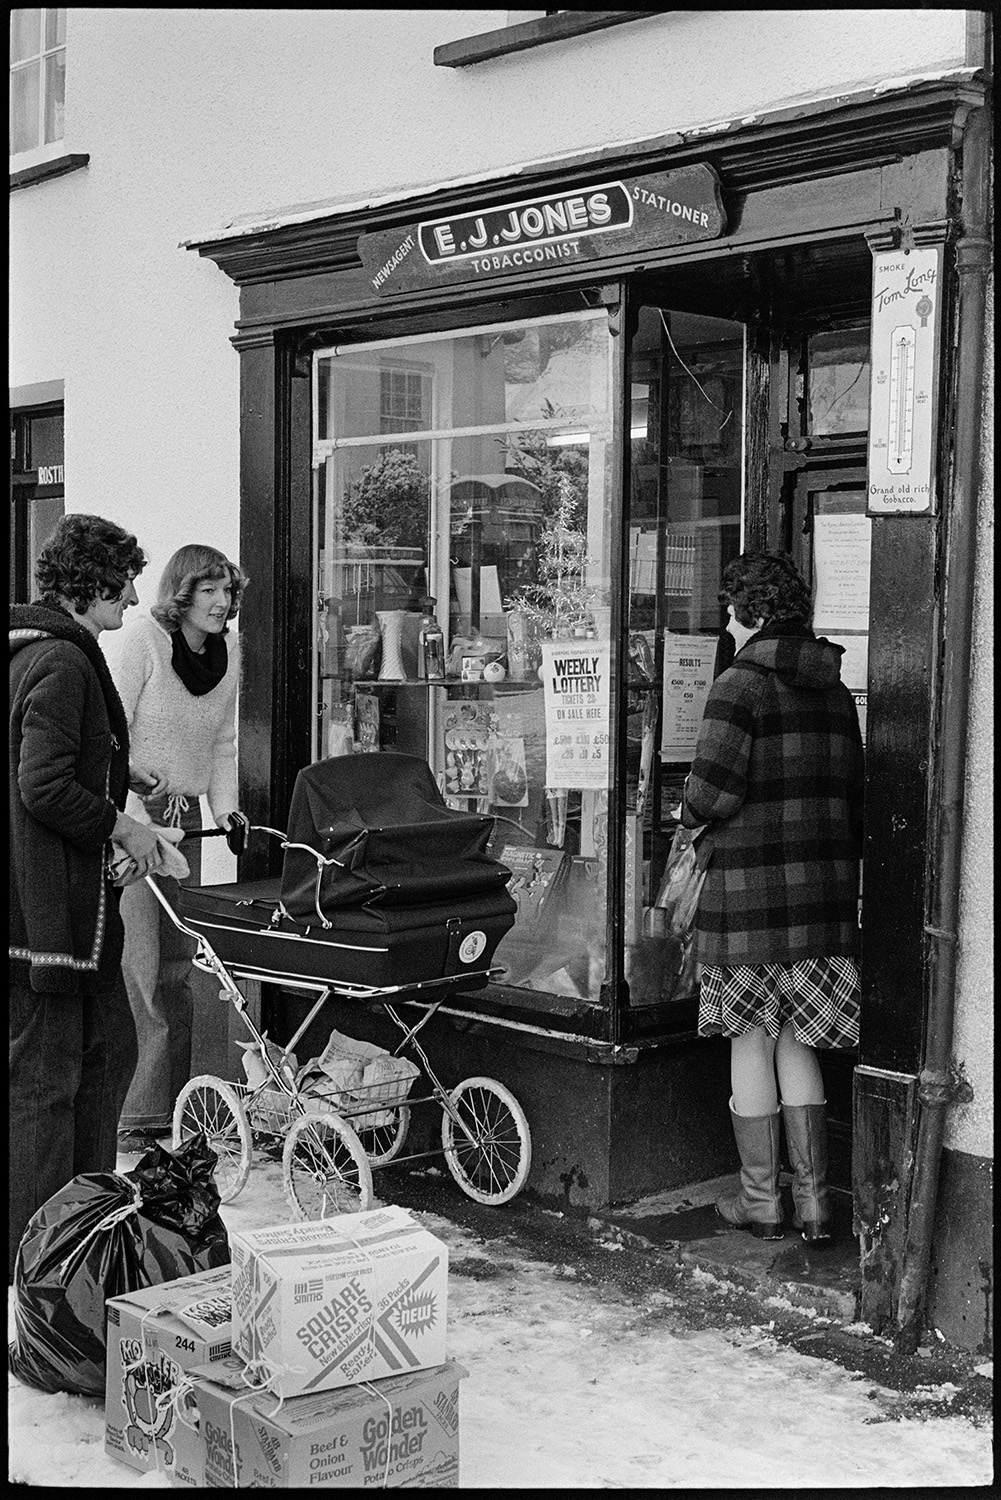 Shop front with women and pram. 
[People, including a woman with a pram outside the shop front of E J Jones, Tobacconist in Winkleigh. A bin bag and crisp boxes can be seen on the snow covered pavement outside the shop.]